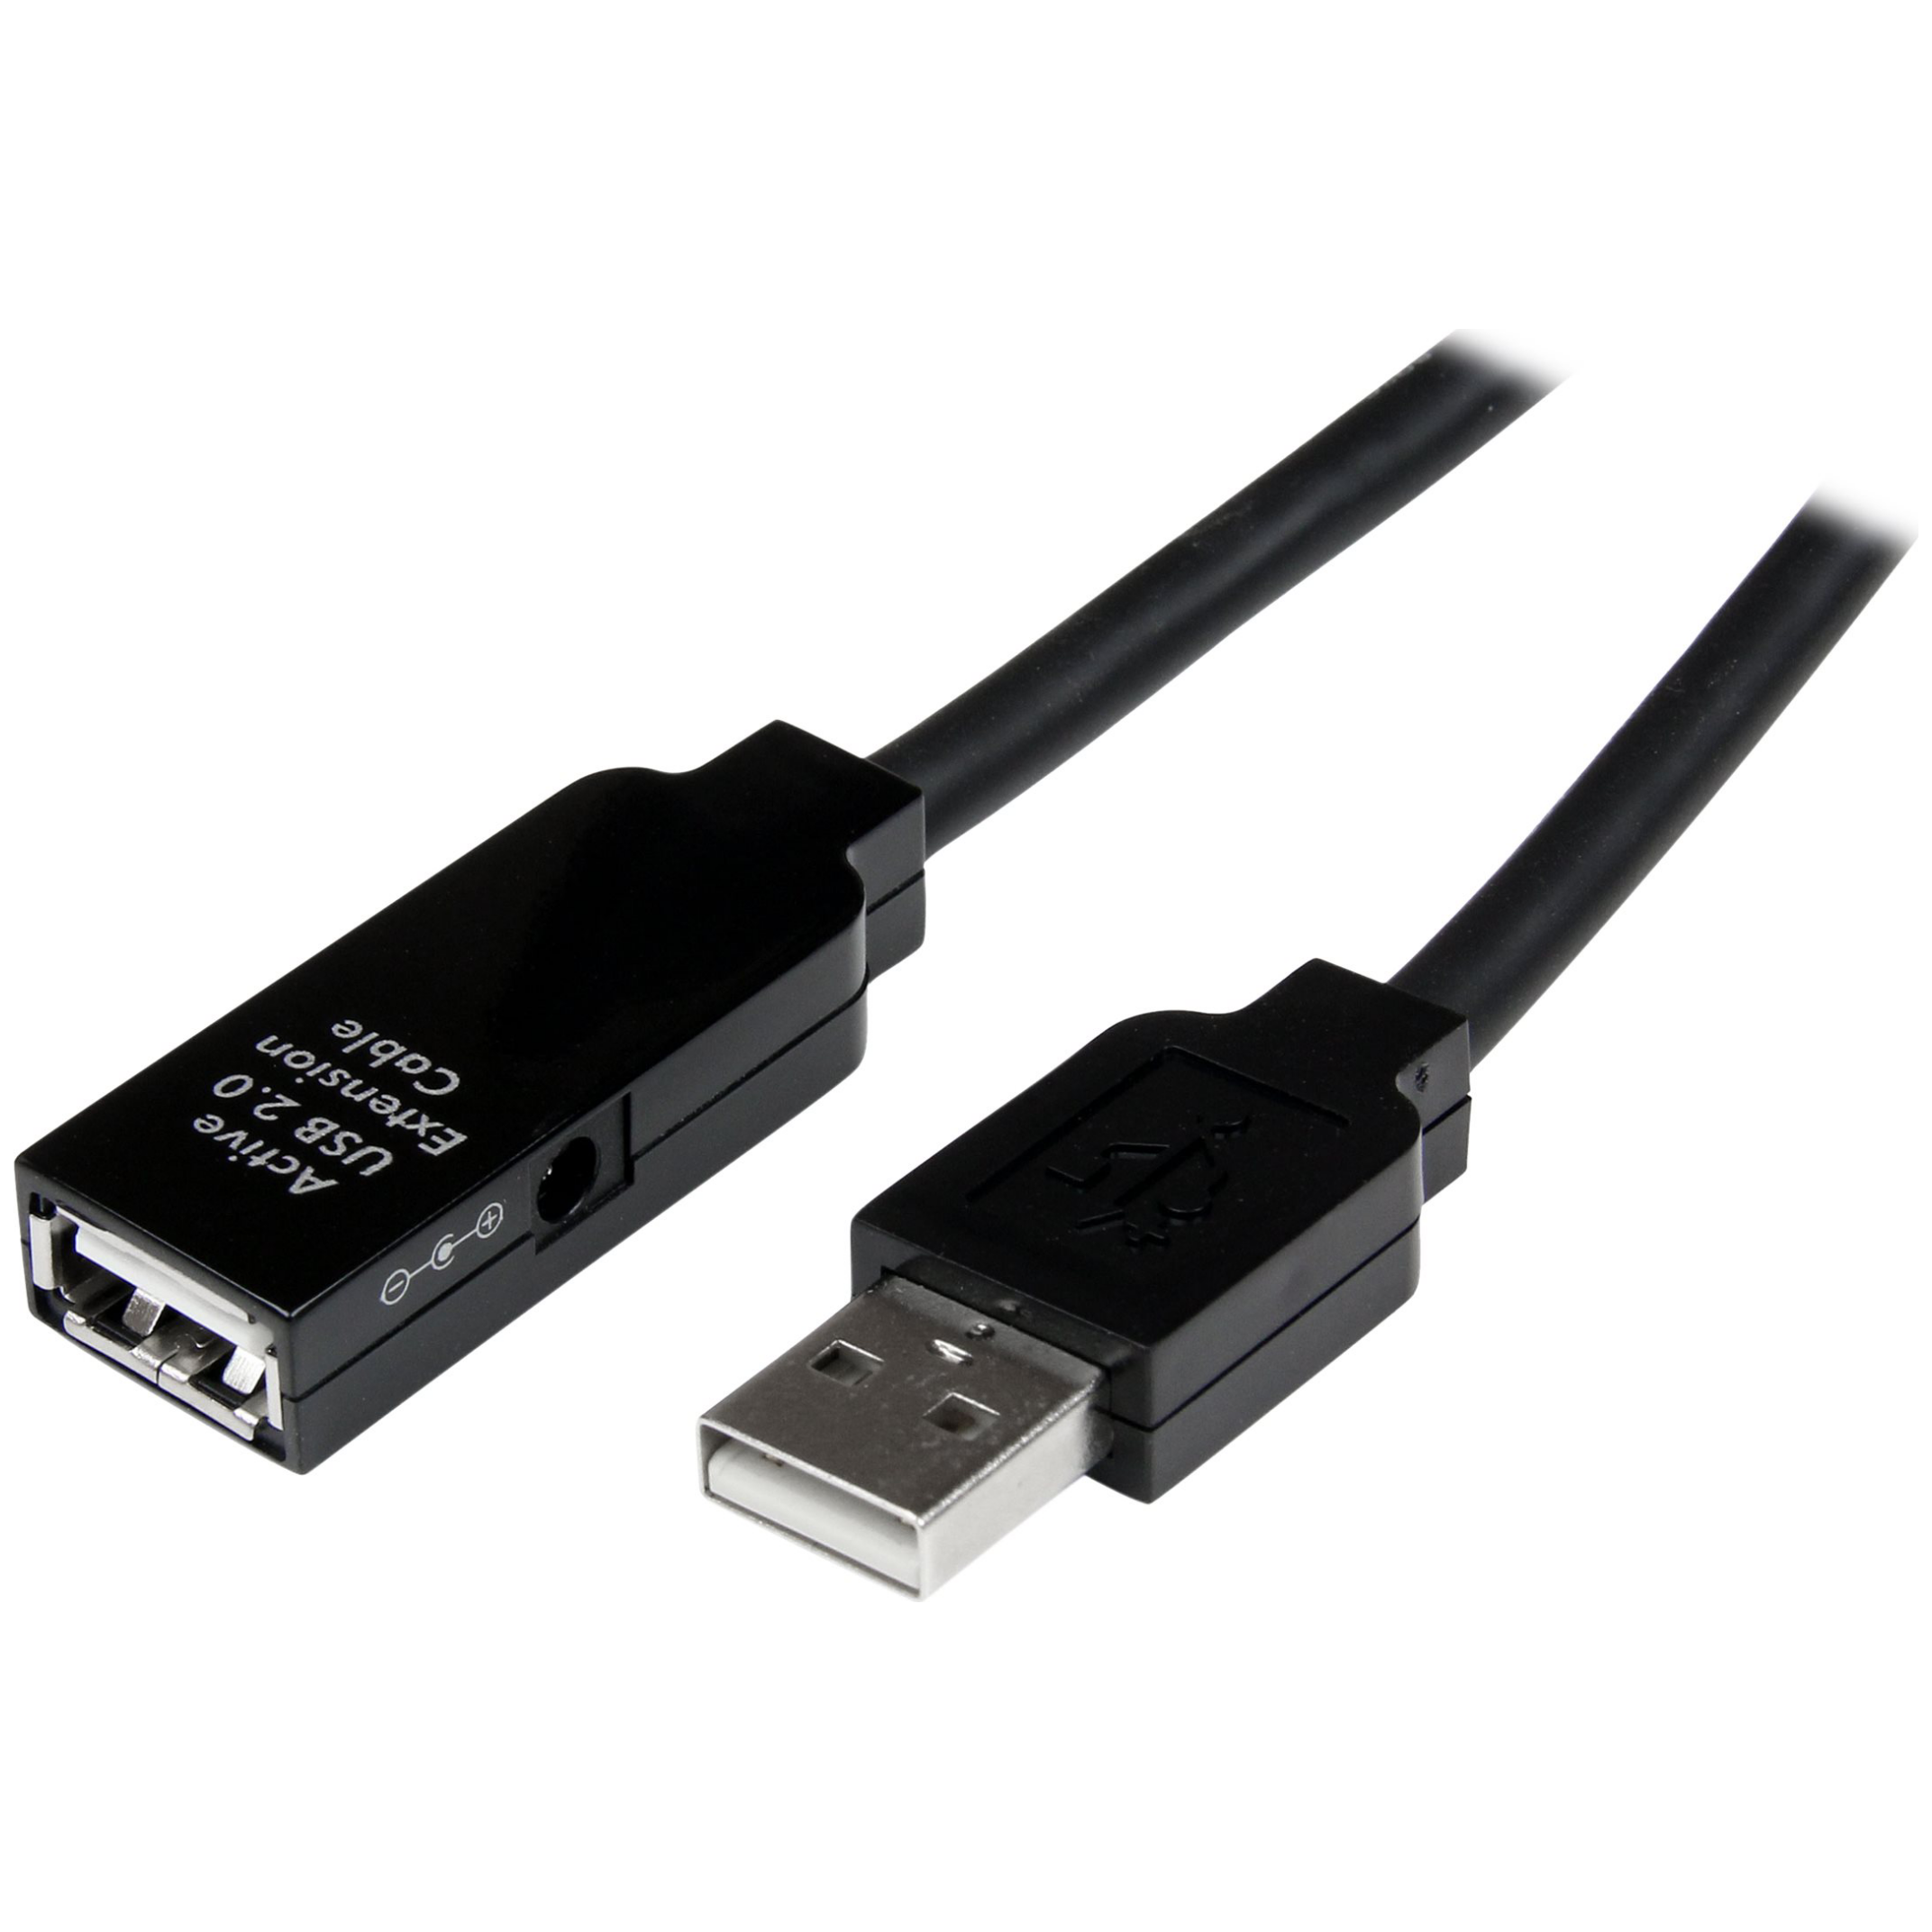 Black StarTech.com 15m USB 2.0 Active Extension Cable 15 meter USB 2.0 Repeater Cable Cord USB2AAEXT15M 15 m M/F USB A Male to USB A Female